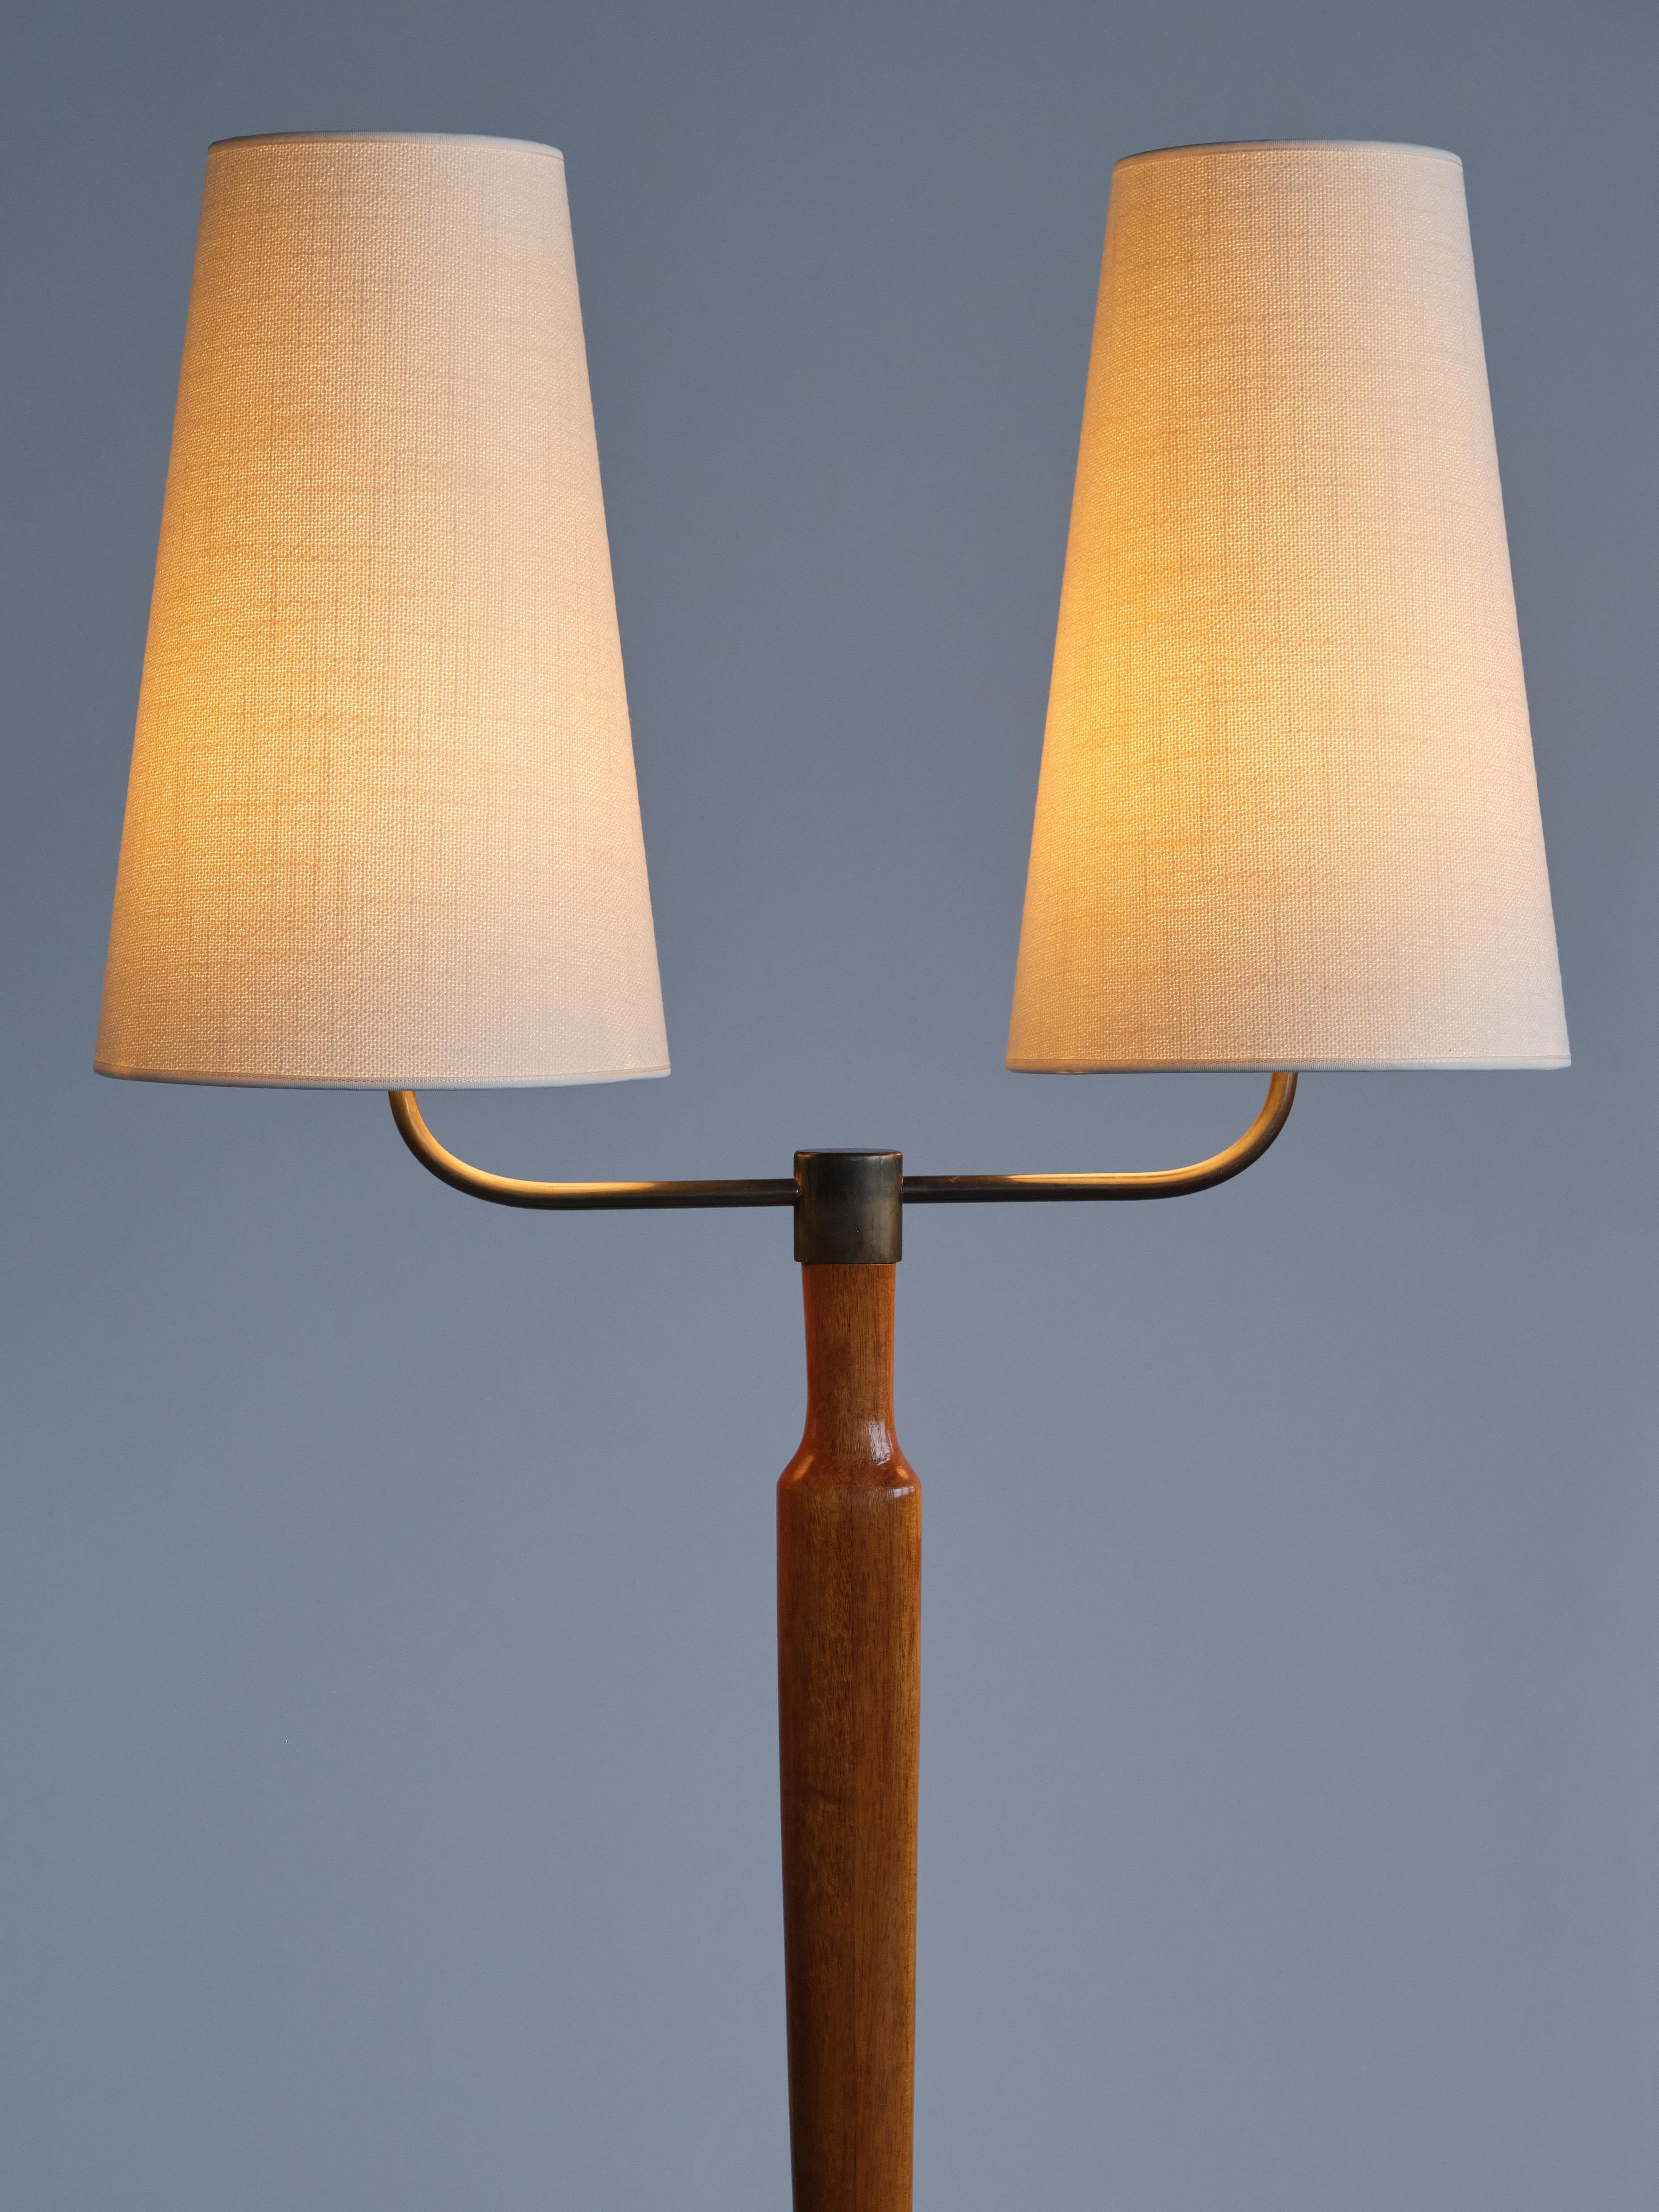 Swedish Modern Two Arm Floor Lamp in Teak Wood and Brass, Sweden, Late 1940s For Sale 1